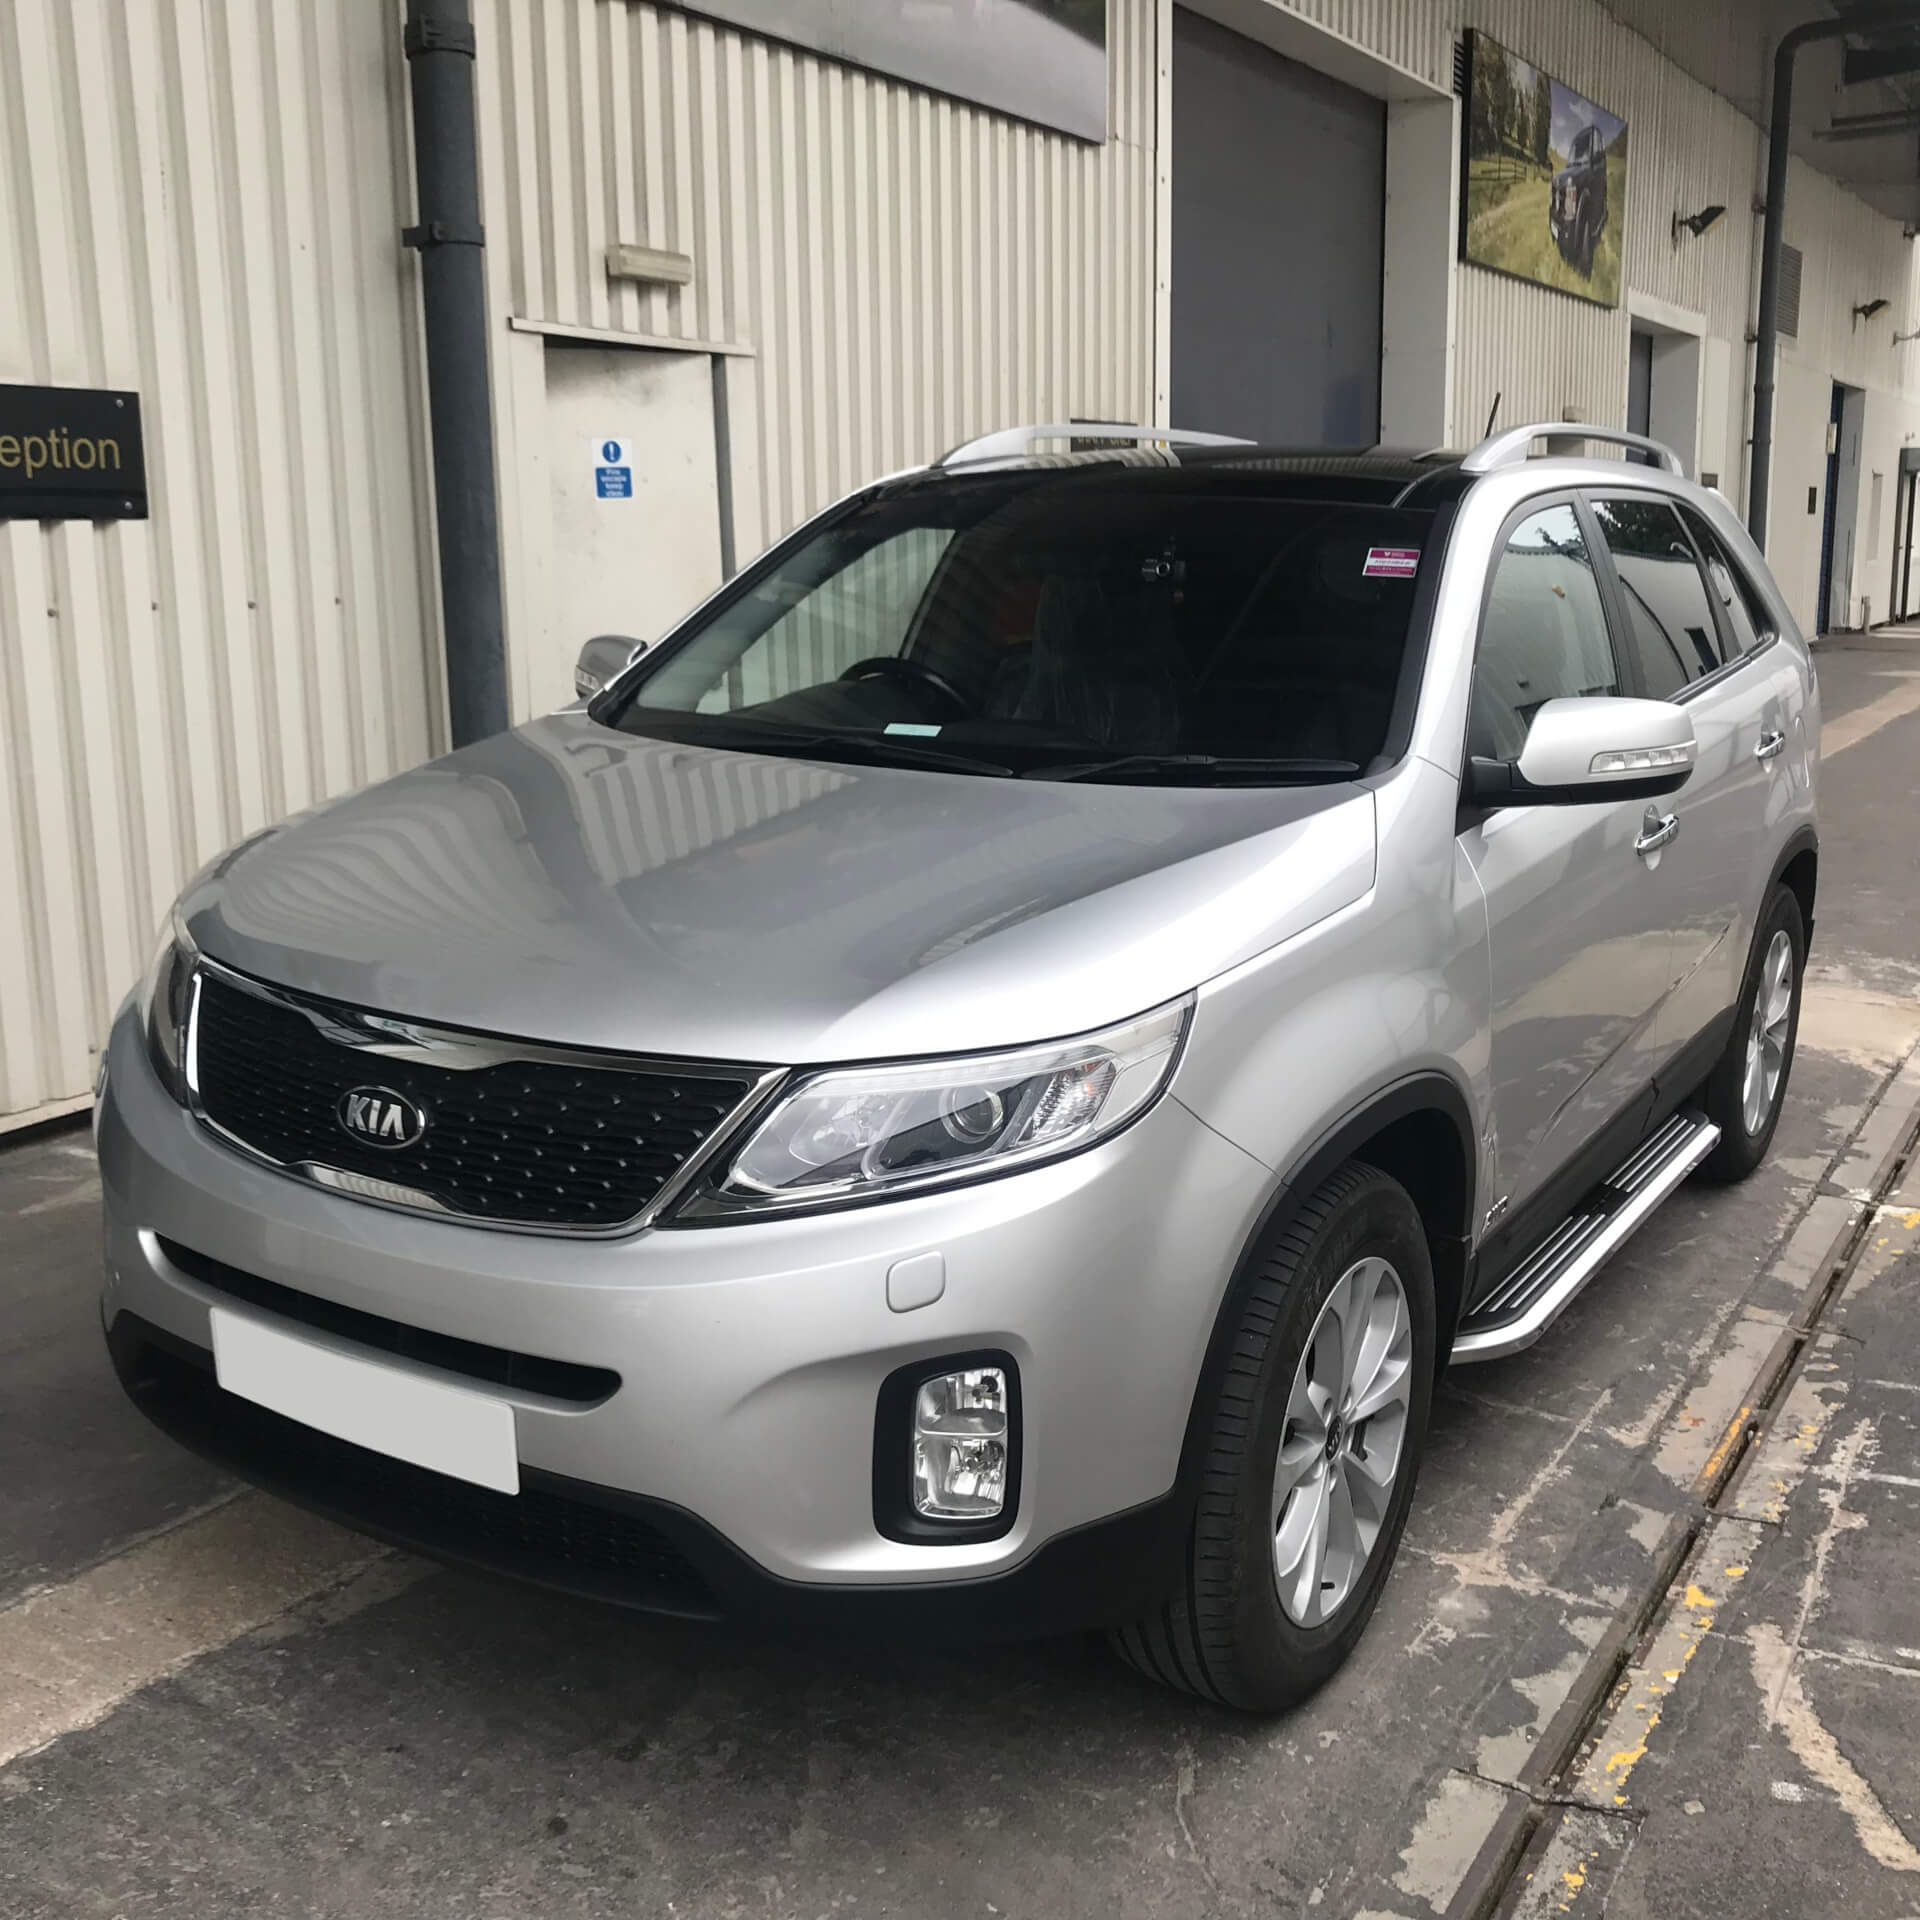 Direct4x4 accessories for Kia Sorento vehicles with a photo of a silver Kia Sorento parked outside our office with our premier side steps fitted